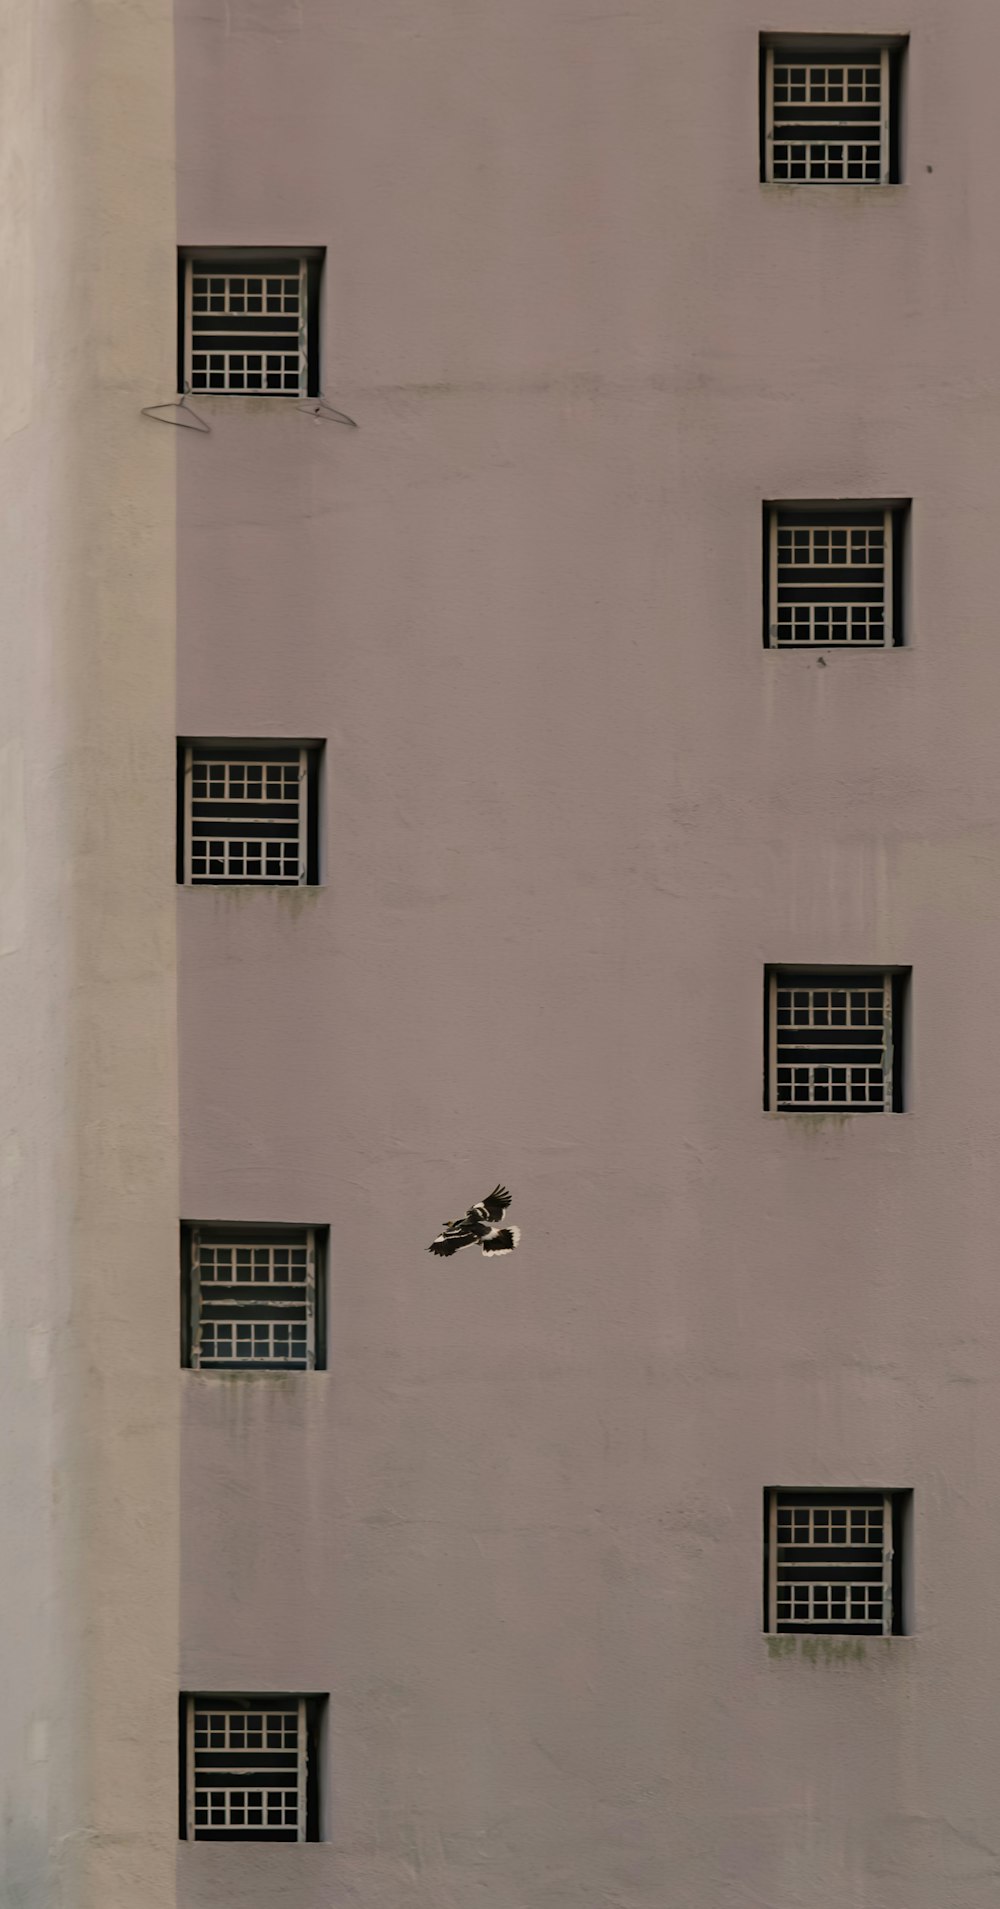 a building with several windows and a bird flying by